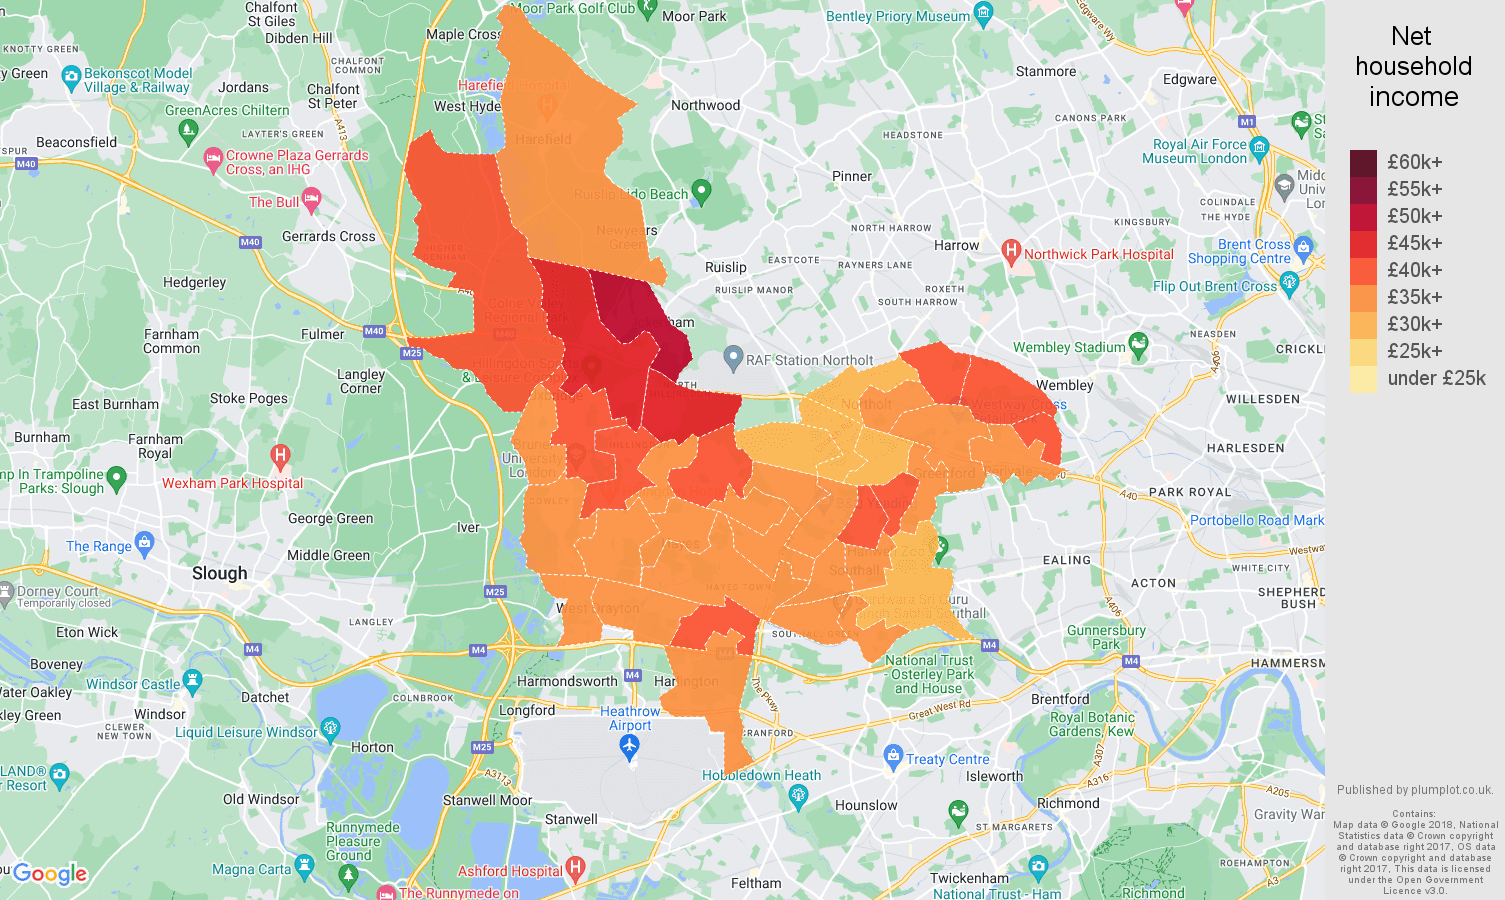 Southall net household income map